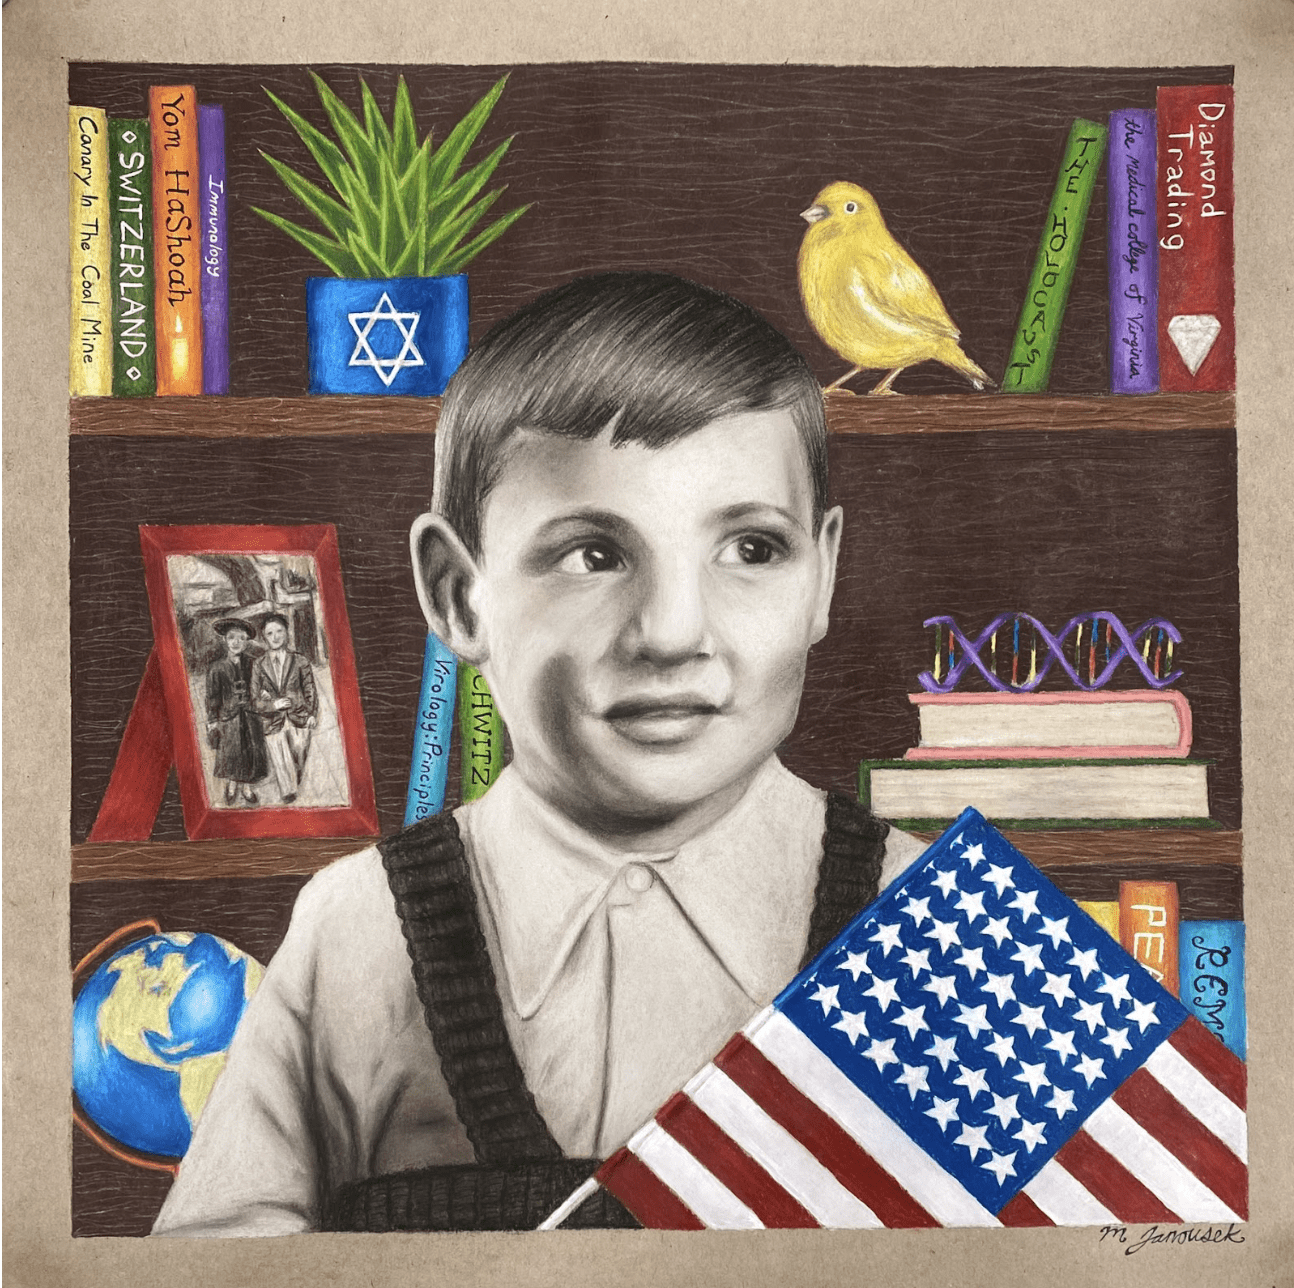 Pencil drawing of Roger Loria as a little boy holding an American Flag